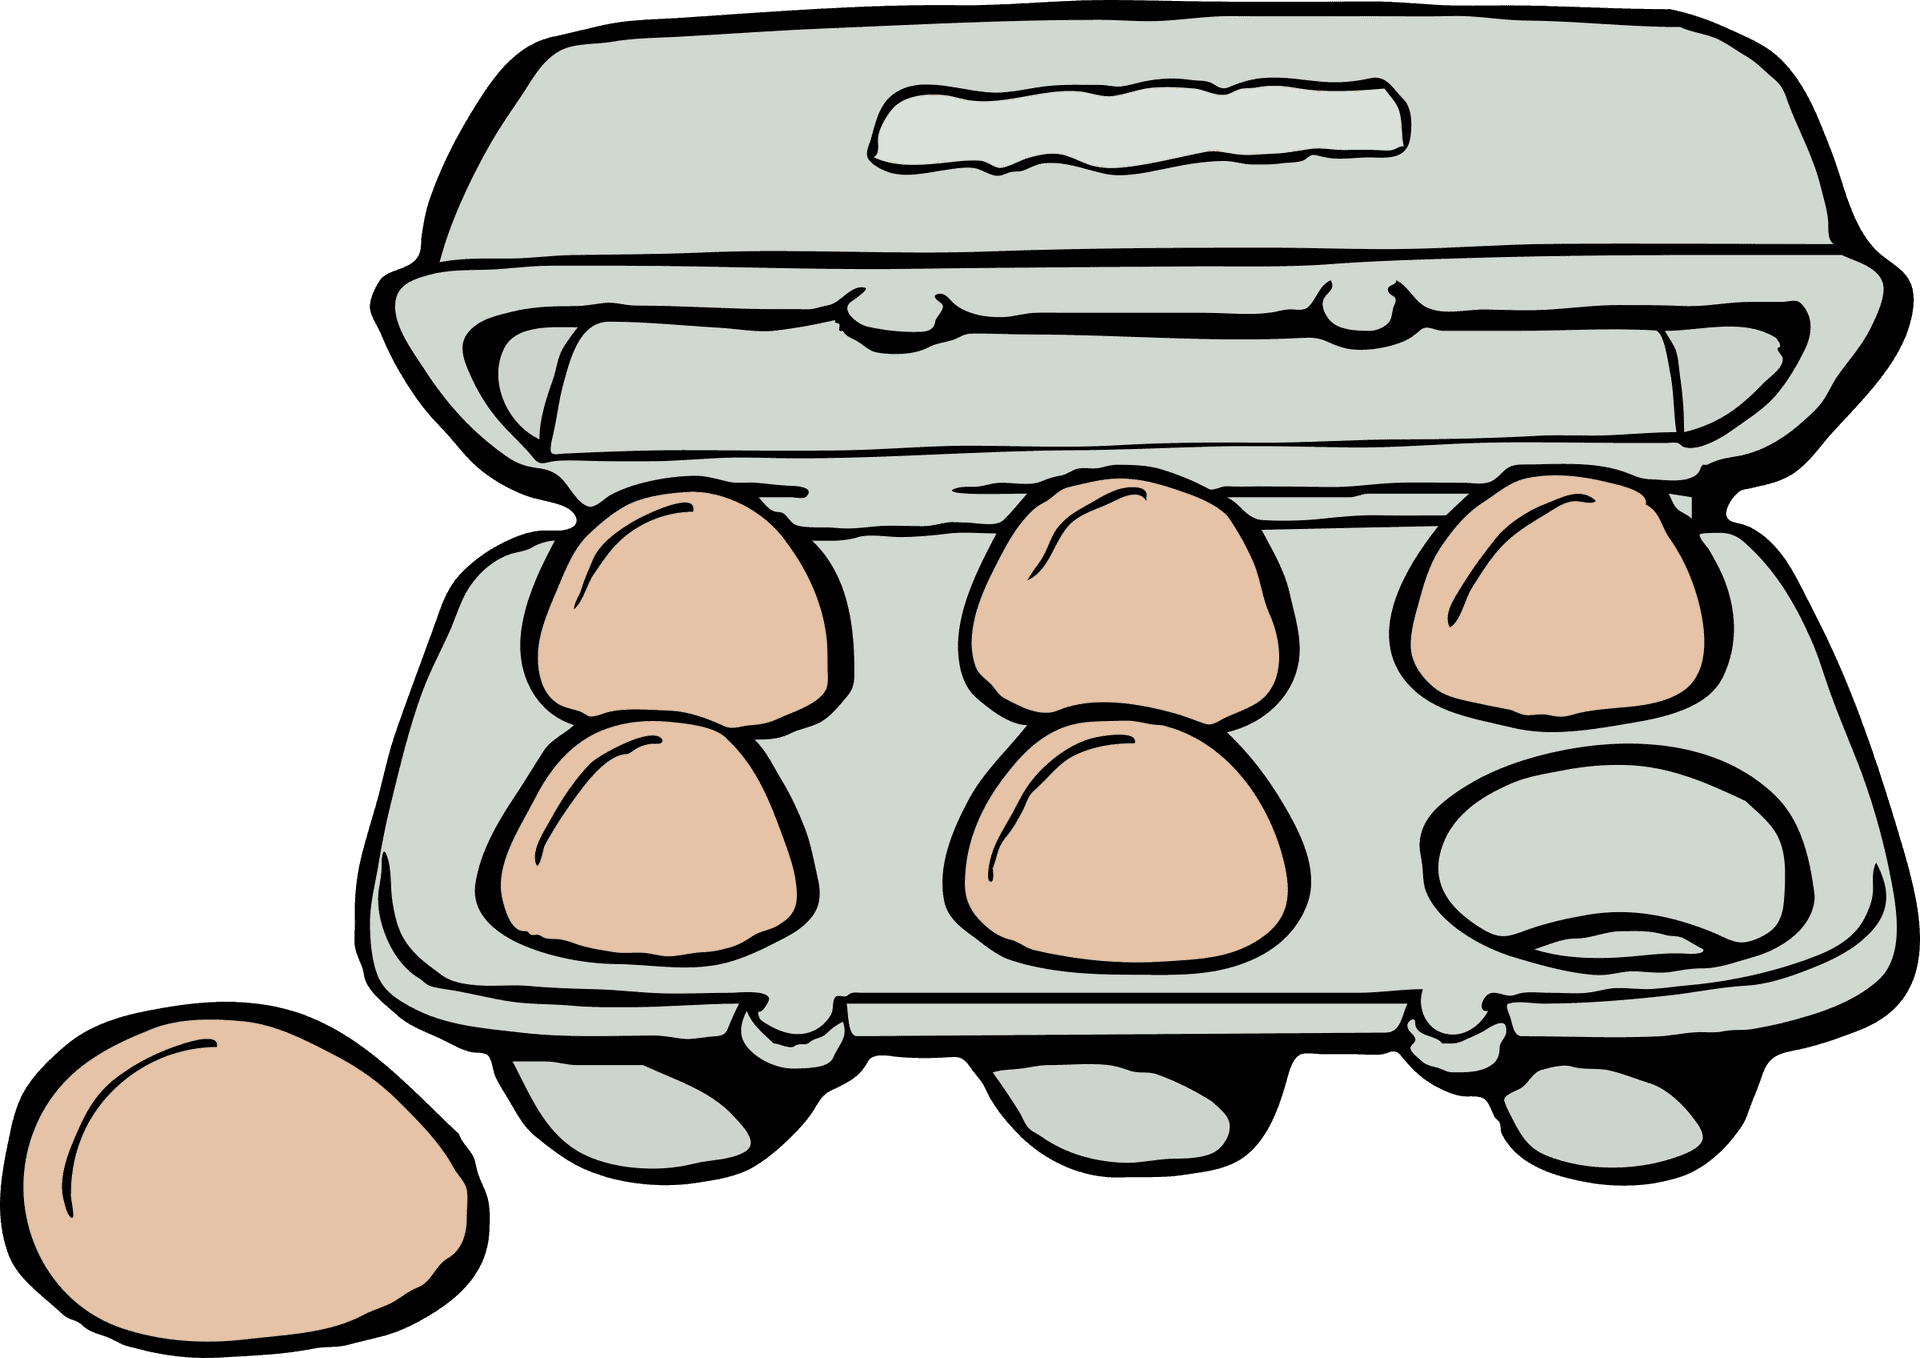 Open Egg Carton With One Egg Missing PNG image